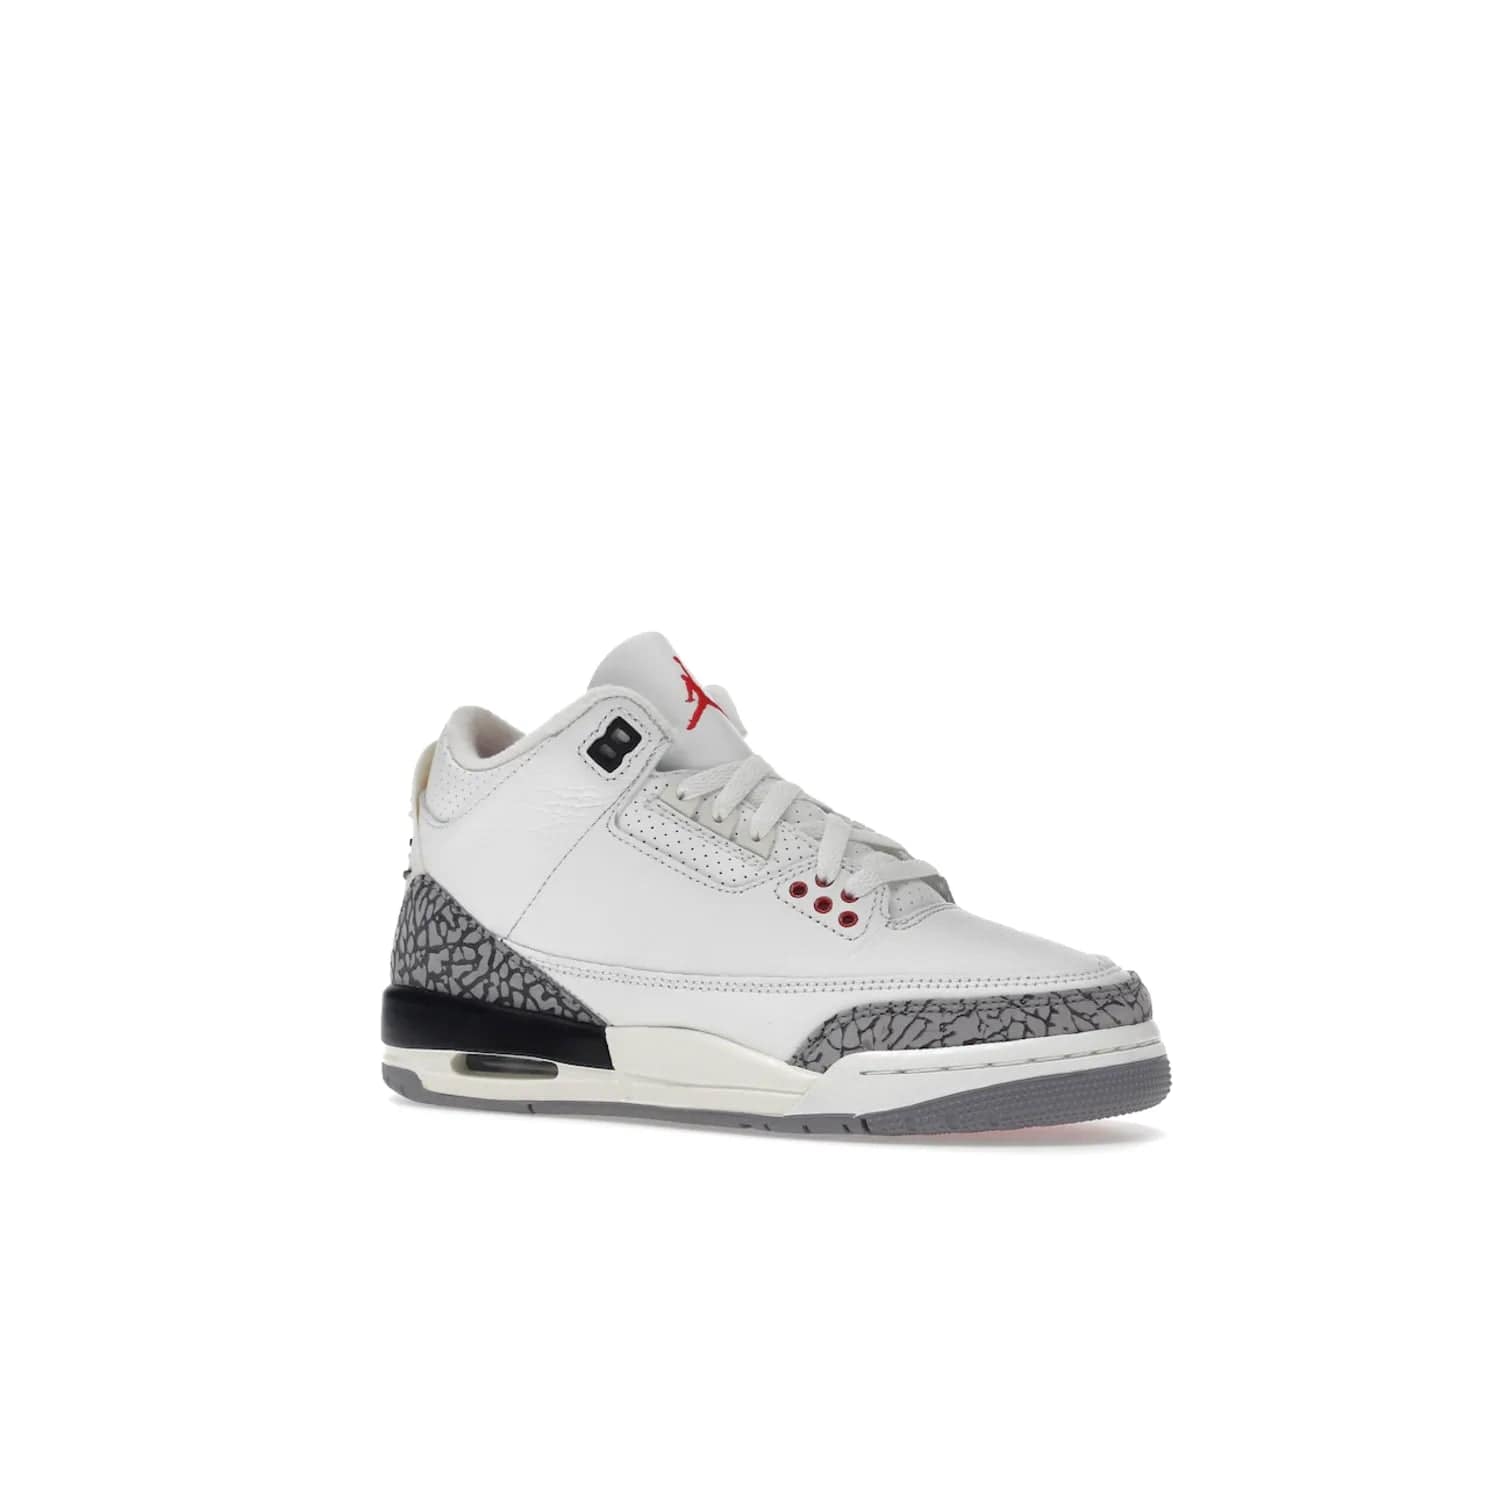 Jordan 3 Retro White Cement Reimagined (GS) - Image 4 - Only at www.BallersClubKickz.com - Grab the perfect blend of modern design and classic style with the Jordan 3 Retro White Cement Reimagined (GS). Features Summit White, Fire Red, Black, and Cement Grey colorway, iconic Jordan logo embroidered on the tongue, and “Nike Air” branding. Limited availability, get your pair before March 11th 2023.